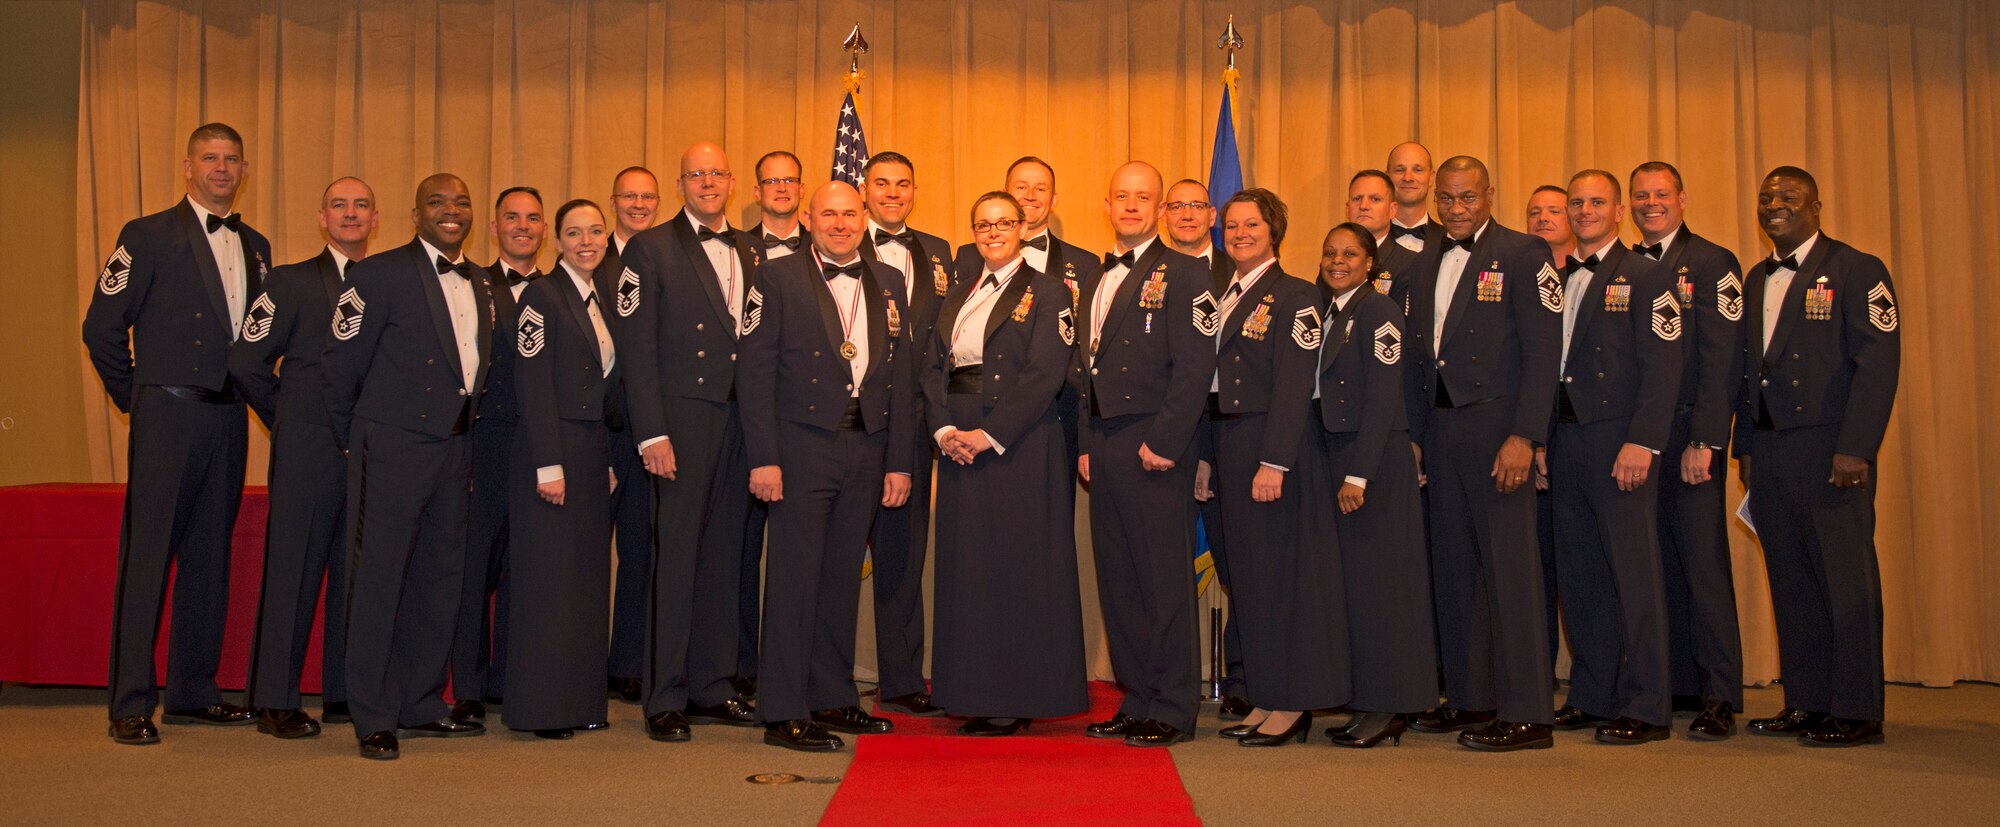 Chief selectees stand for a photo with other Chief Master Sgts. from both Luke Air Force Base, Ariz., and around the Air Force during the Luke Chief Recognition Ceremony, March 3, 2018. Chief Master Sgt. Juliet Gudgel, command chief of the Air Education and Training Command, fifth from left, was the guest speaker at the ceremony. (U.S. Air Force photo/Senior Airman Ridge Shan)